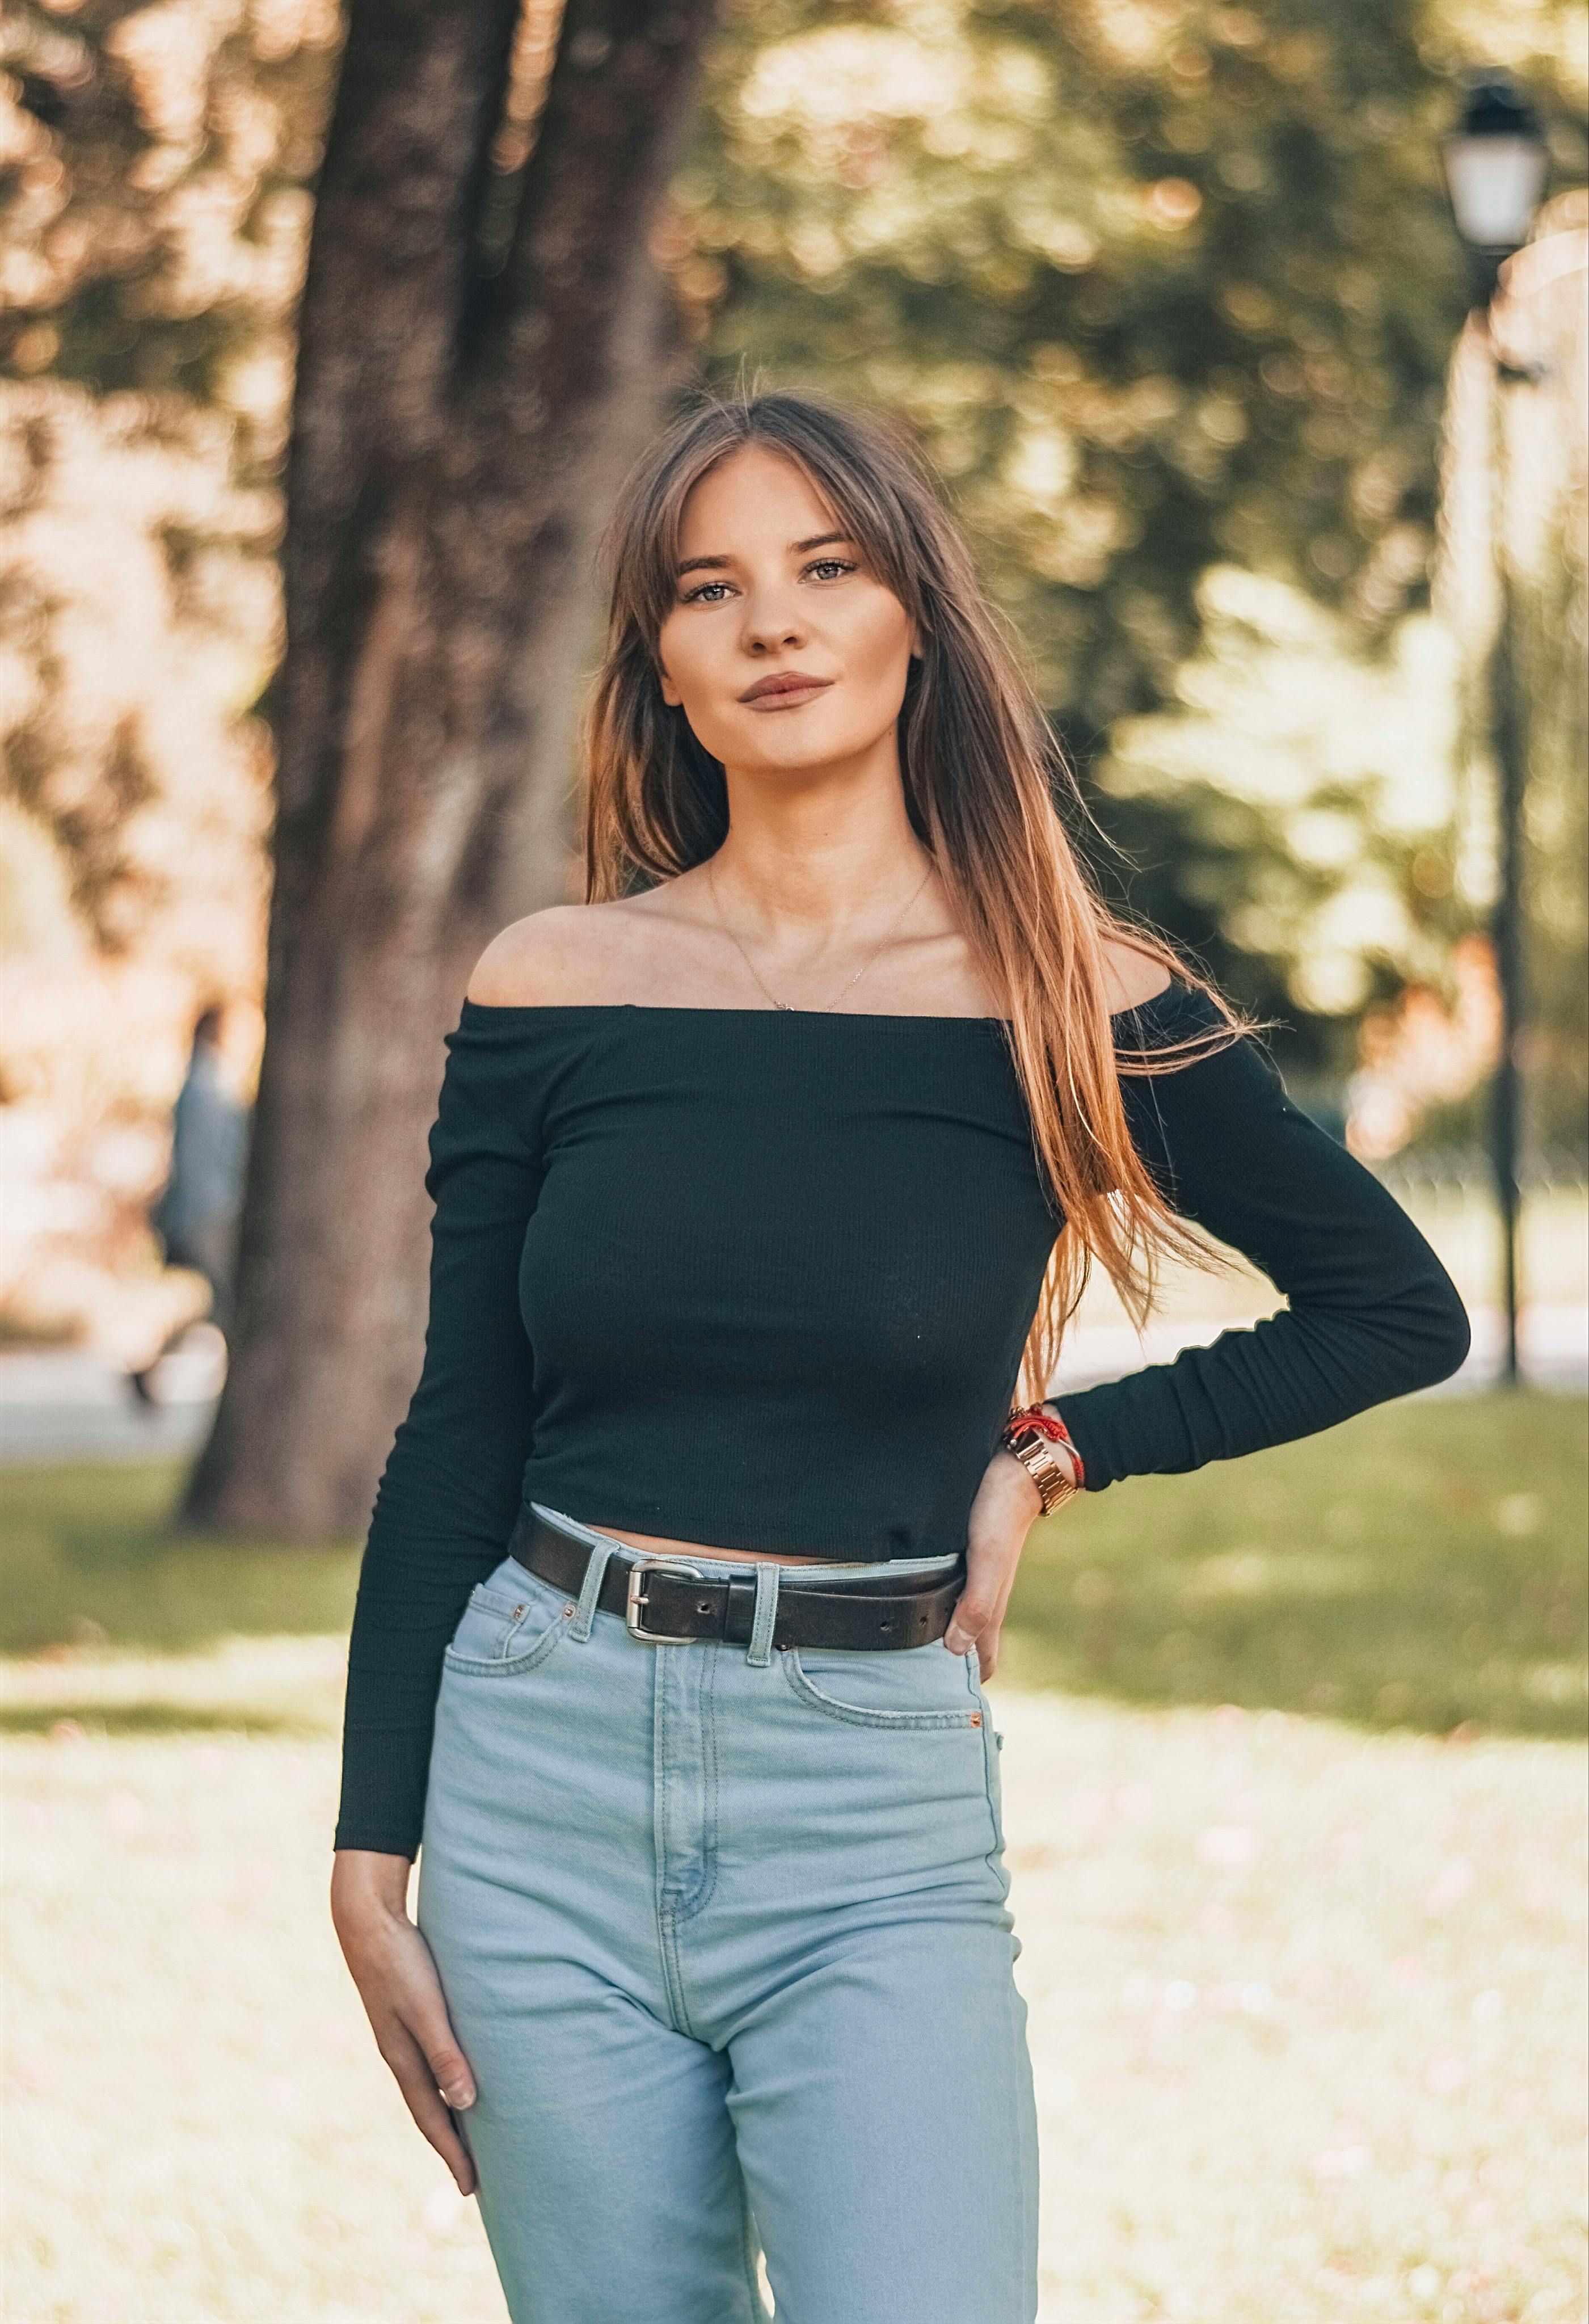 A Woman Wearing an Off-Shoulder Top and Denim Jeans · Free Stock Photo